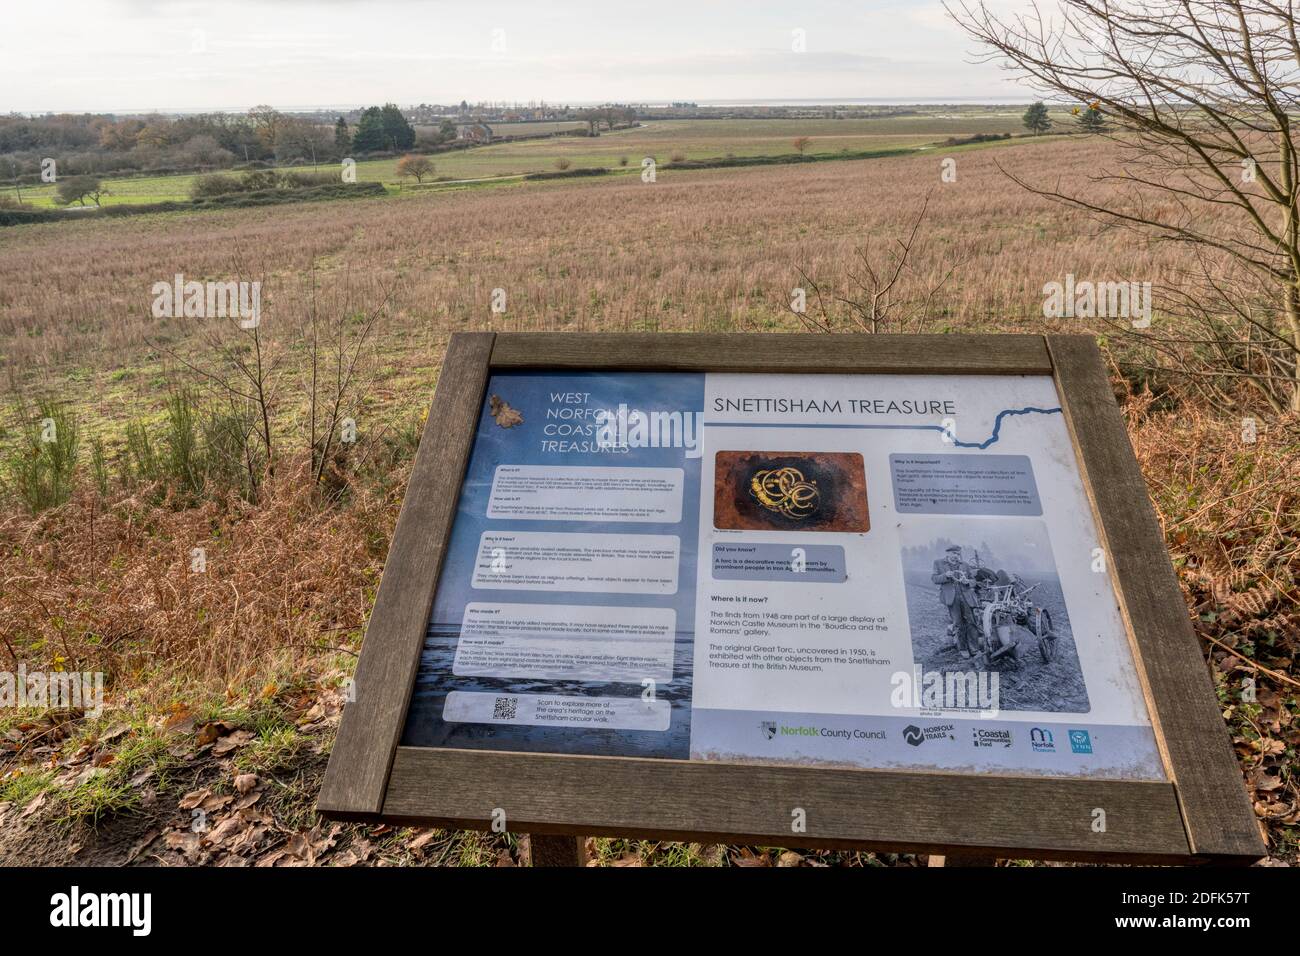 An informative panel about the Iron Age Snettisham treasure found in 1948.  Overlooking the fields on the edge of the Wash. Stock Photo